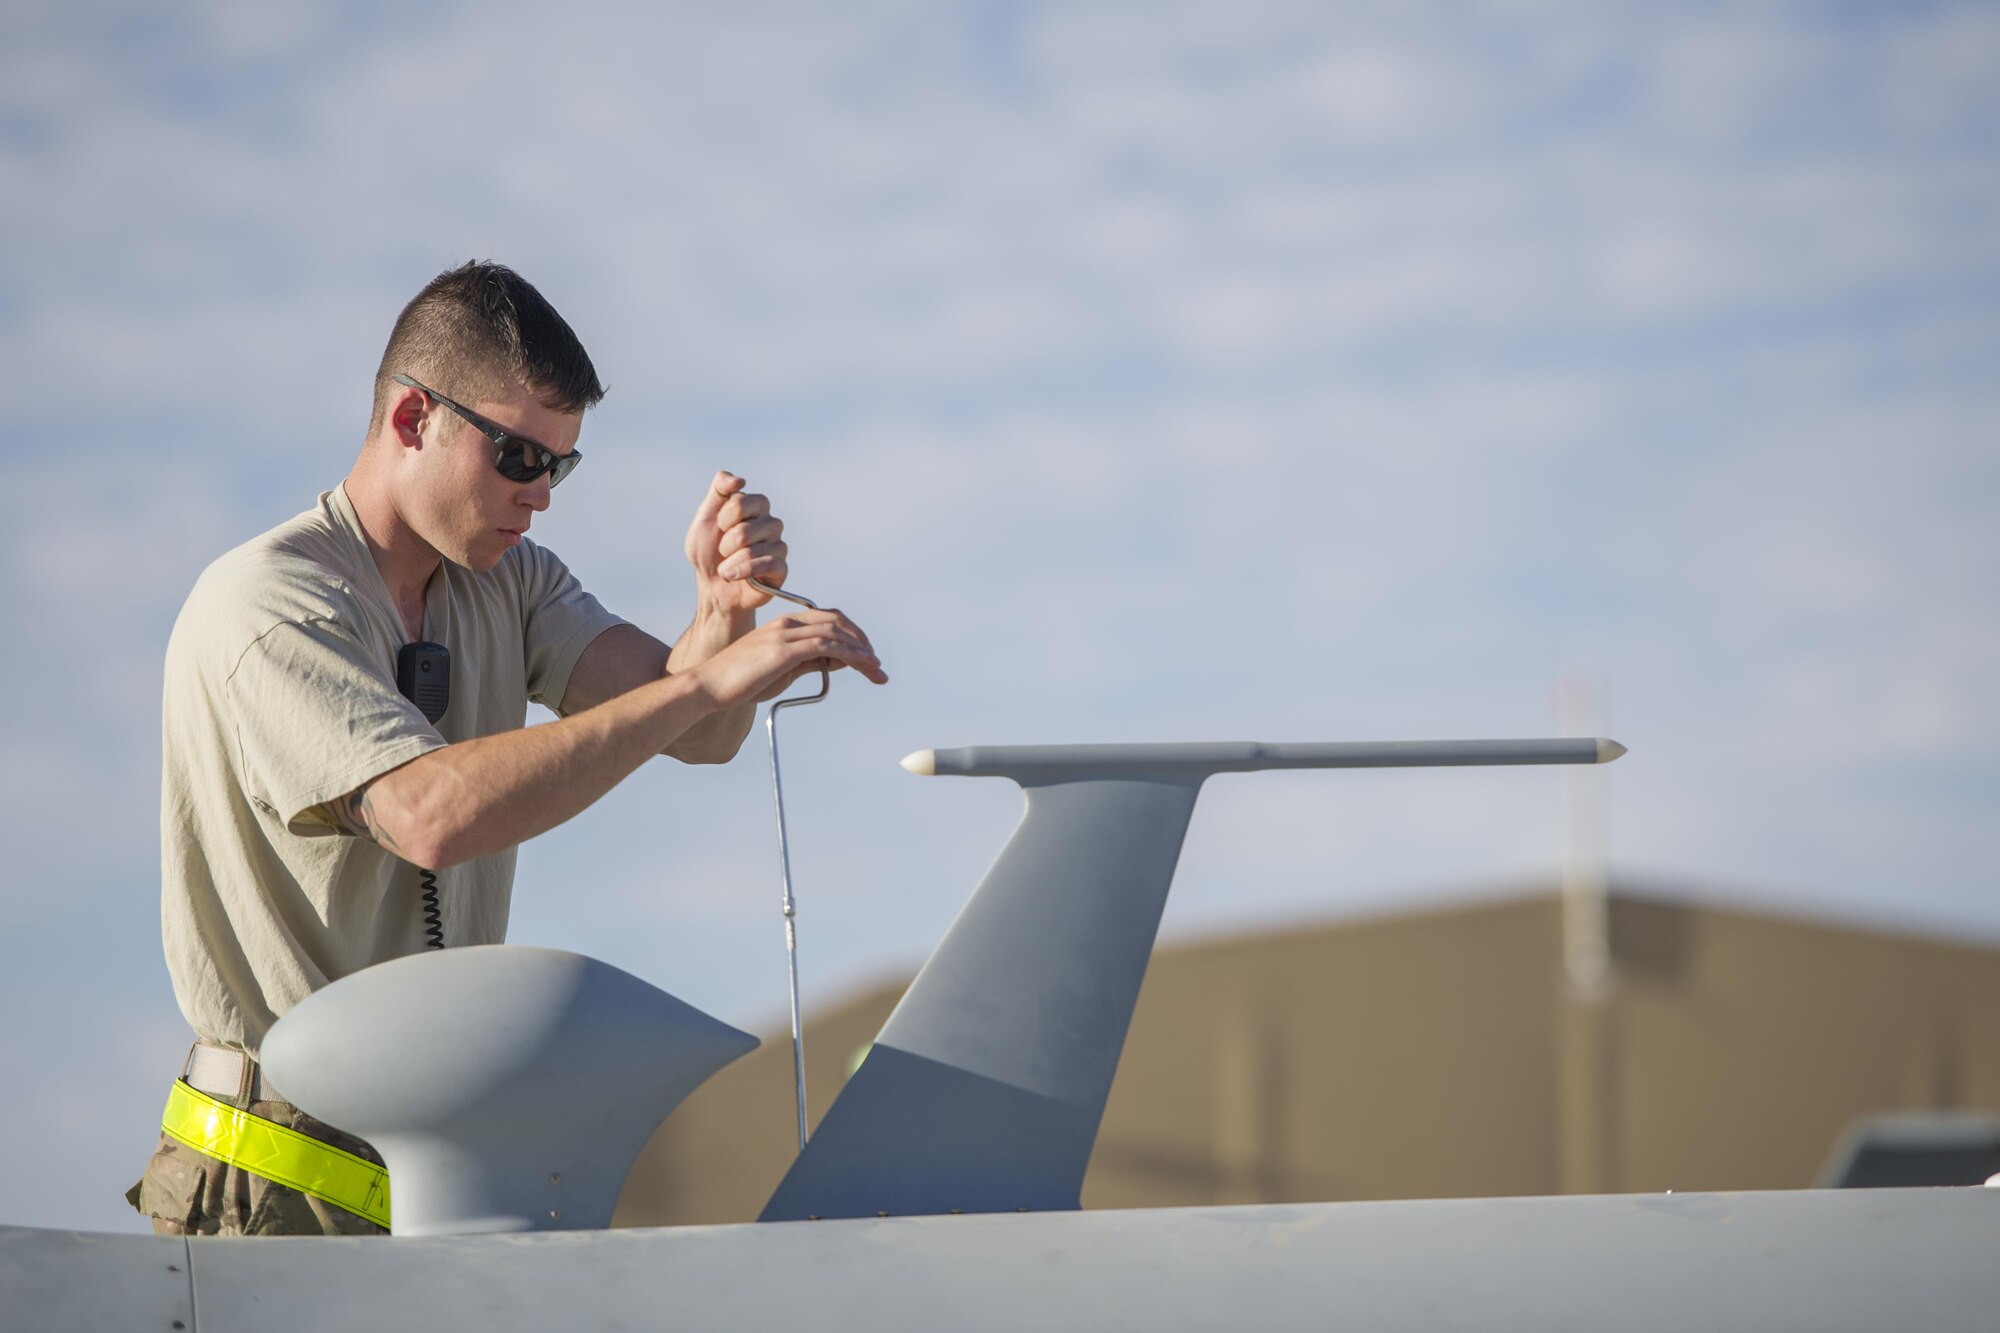 Senior Airman David, 62nd Expeditionary Reconnaissance Squadron aircraft specialist, secures a radio antenna on an MQ-9 Reaper prior to a sortie at Kandahar Airfield, Afghanistan, Dec. 5, 2015. The Reaper is an armed, multi-mission, medium-altitude, long-endurance remotely piloted aircraft that is employed primarily as an intelligence-collection asset and secondarily against dynamic execution targets. (U.S. Air Force photo by Tech. Sgt. Robert Cloys/Released)